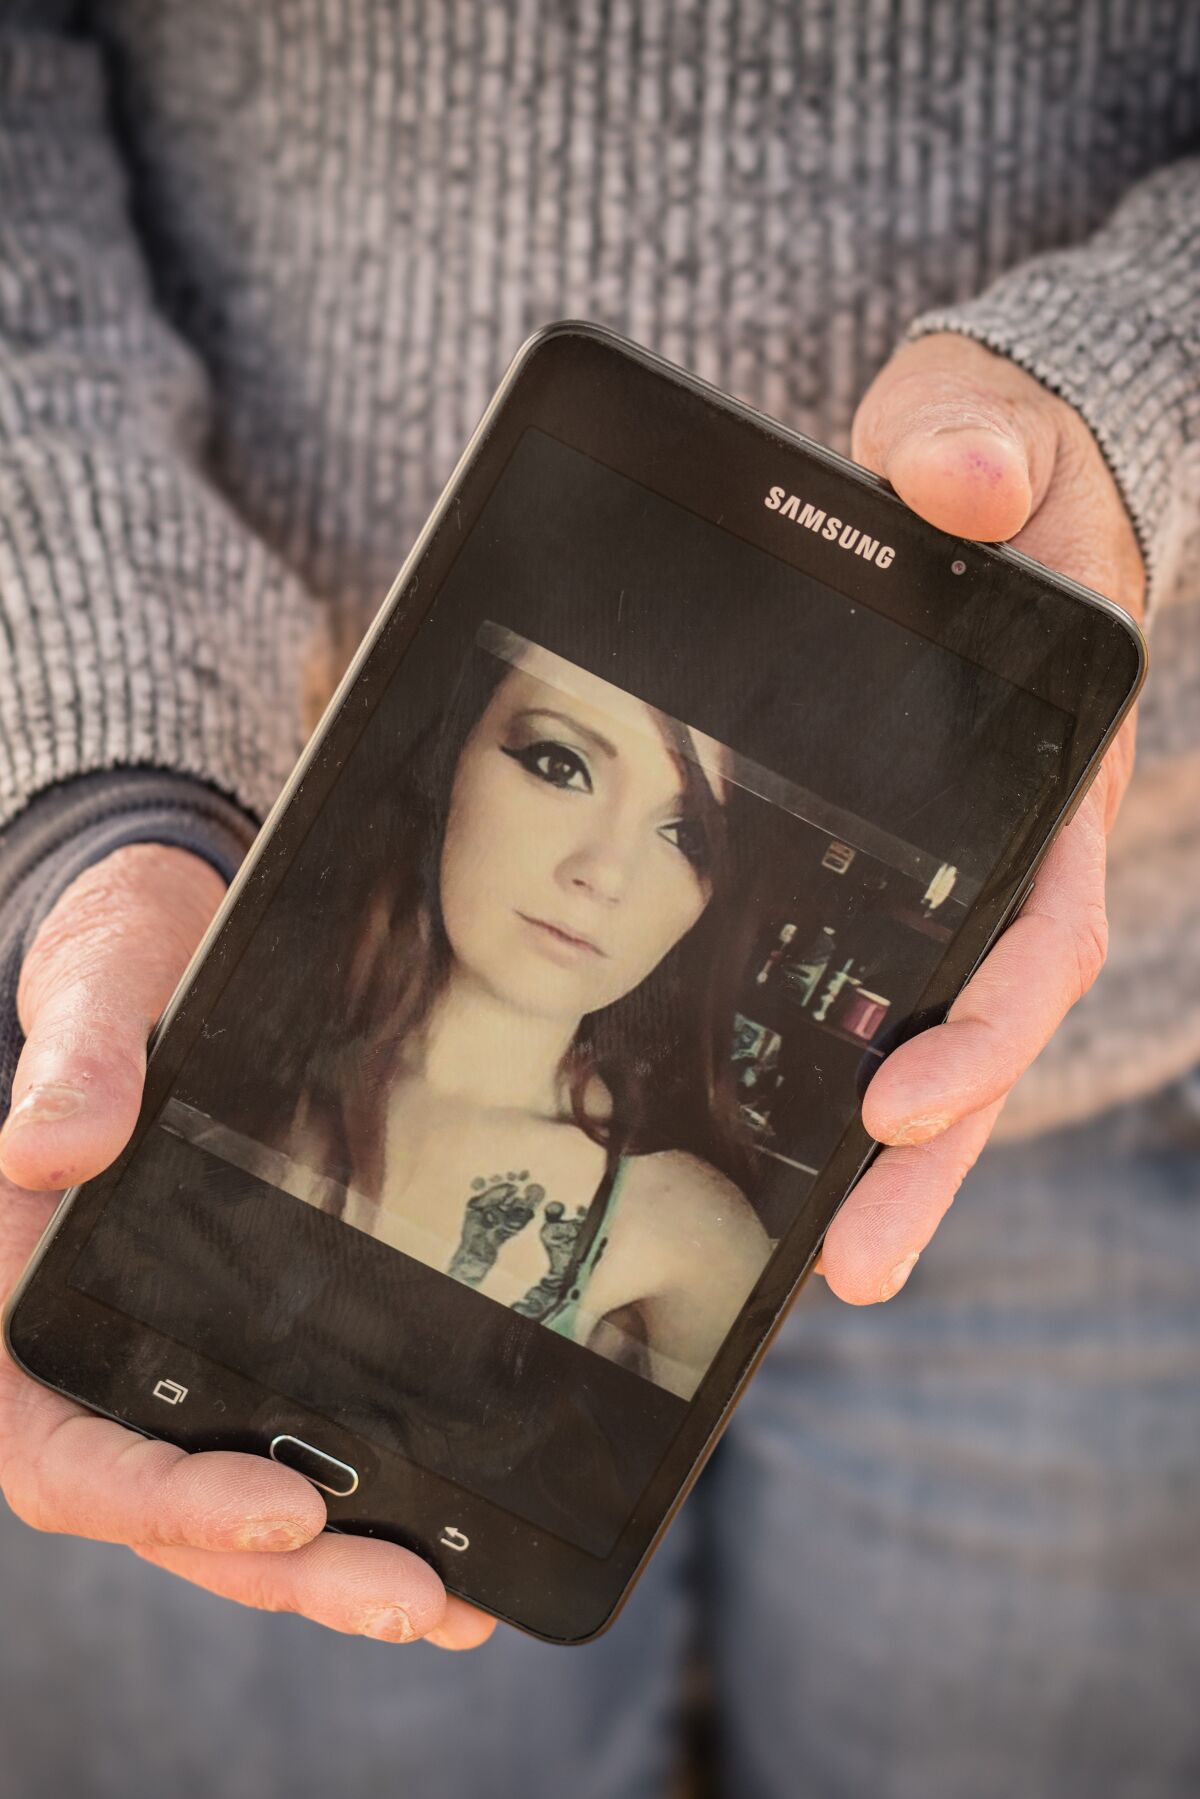 A woman's hands hold a cellphone with the image of a young woman with baby footprints tattooed on her chest.